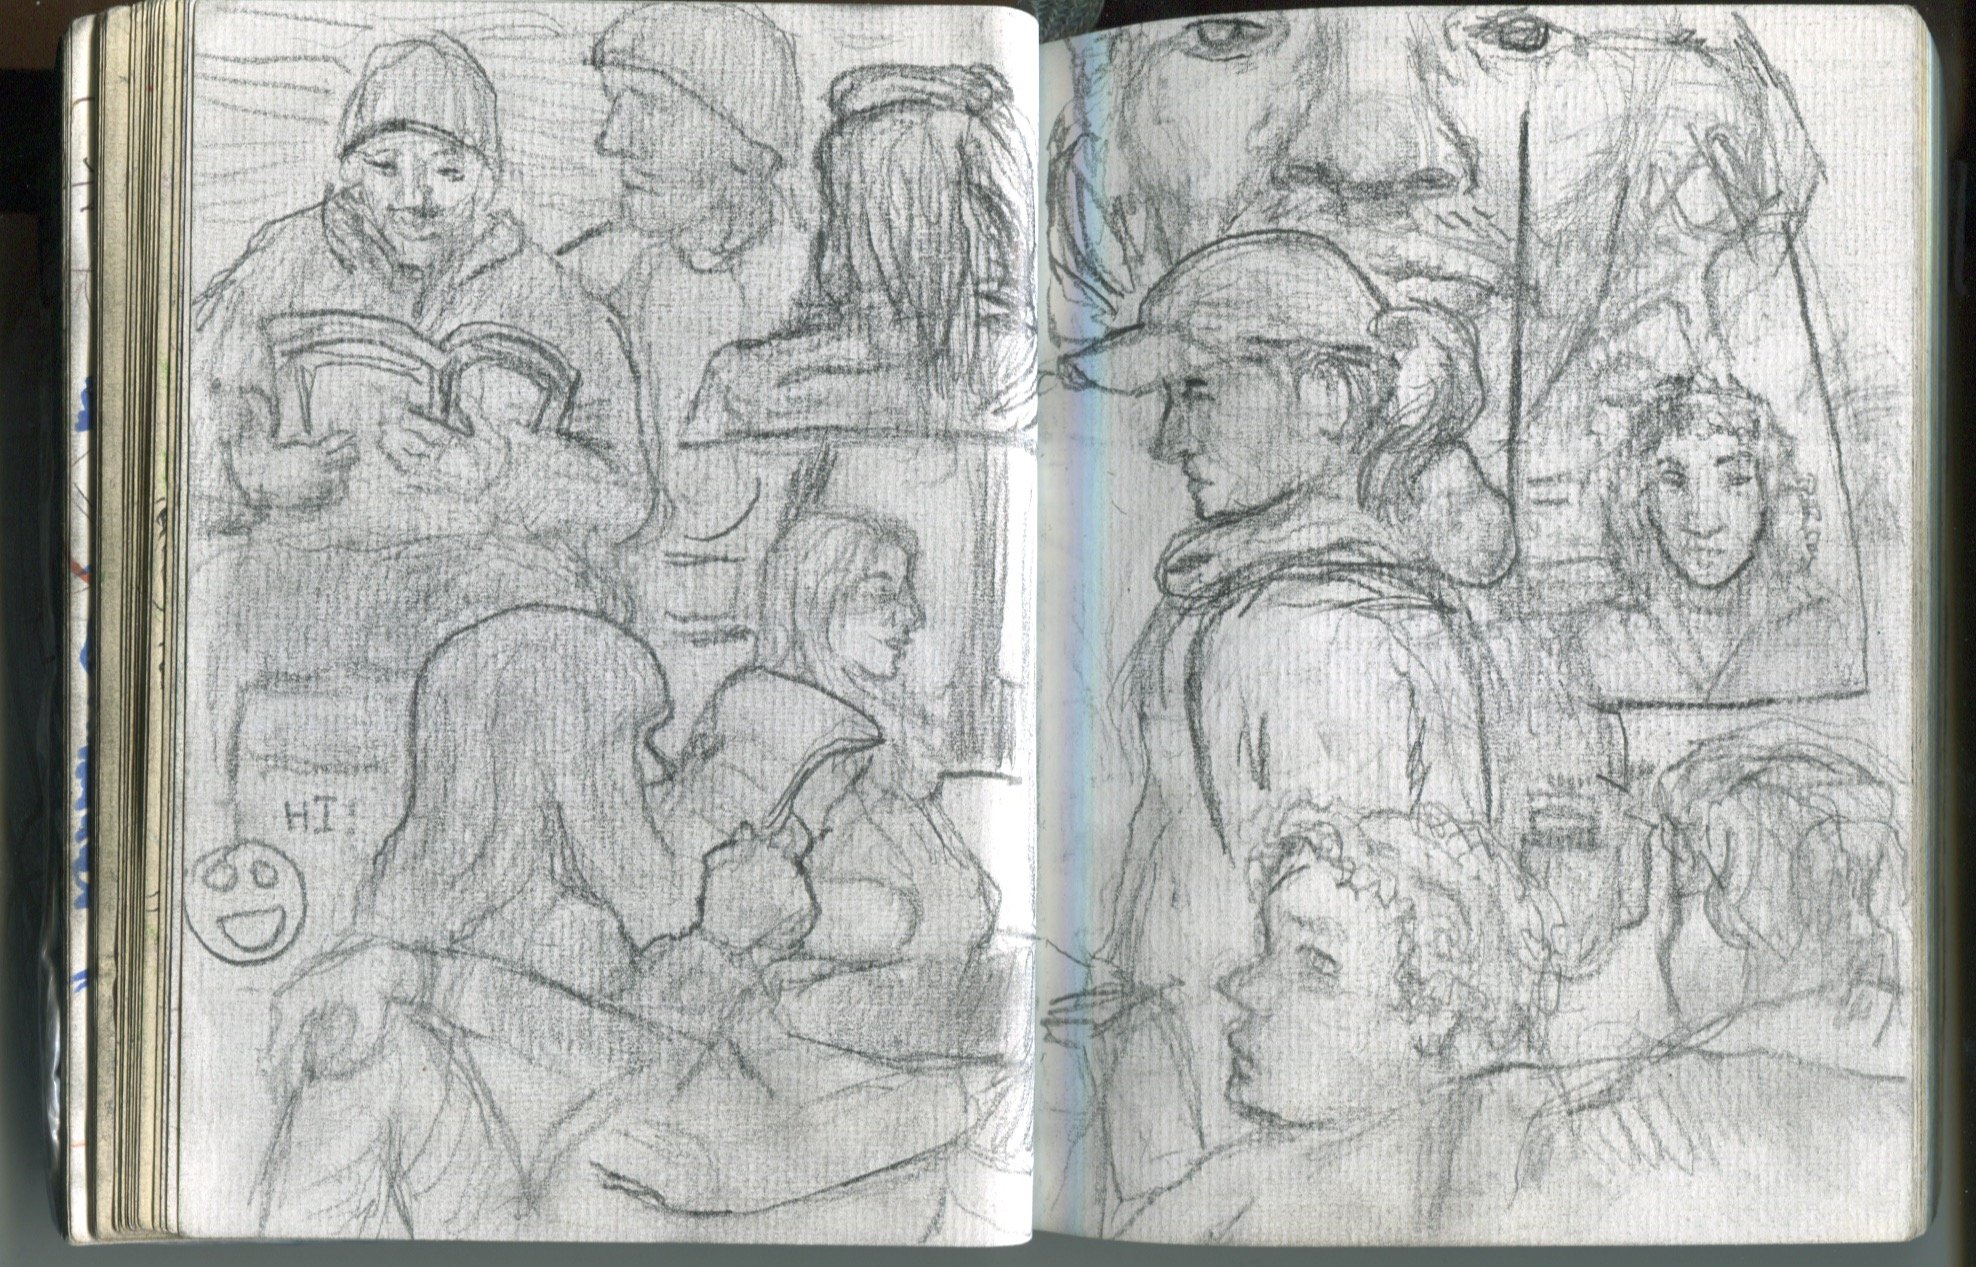  Early Pages from The Sketchbook, 